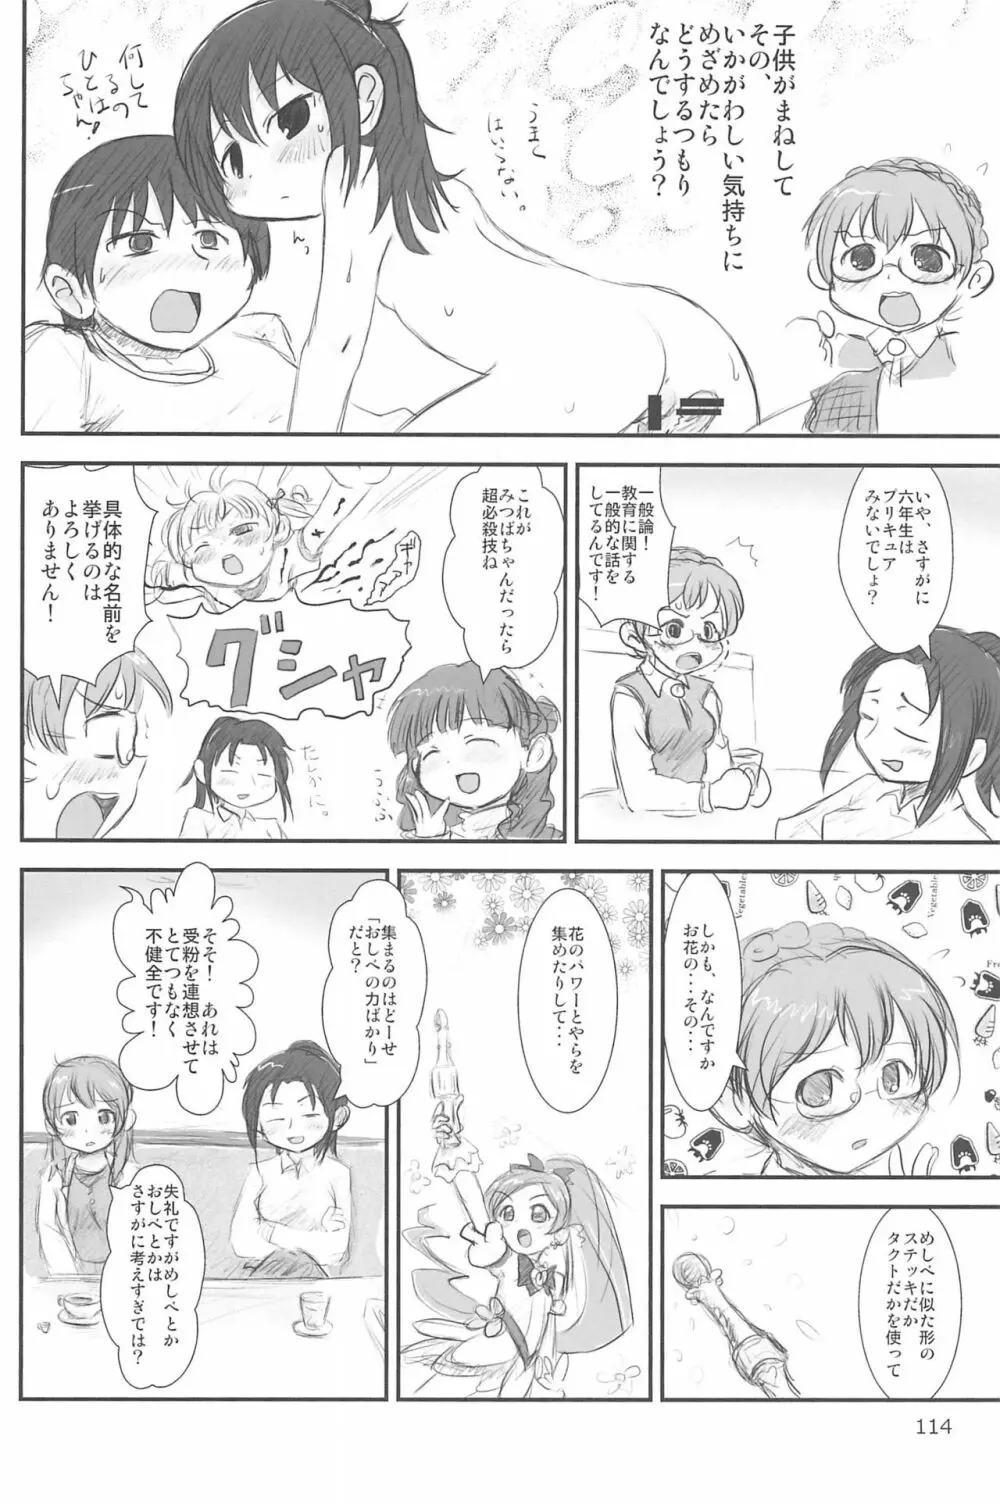 ND-special Volume 6 114ページ